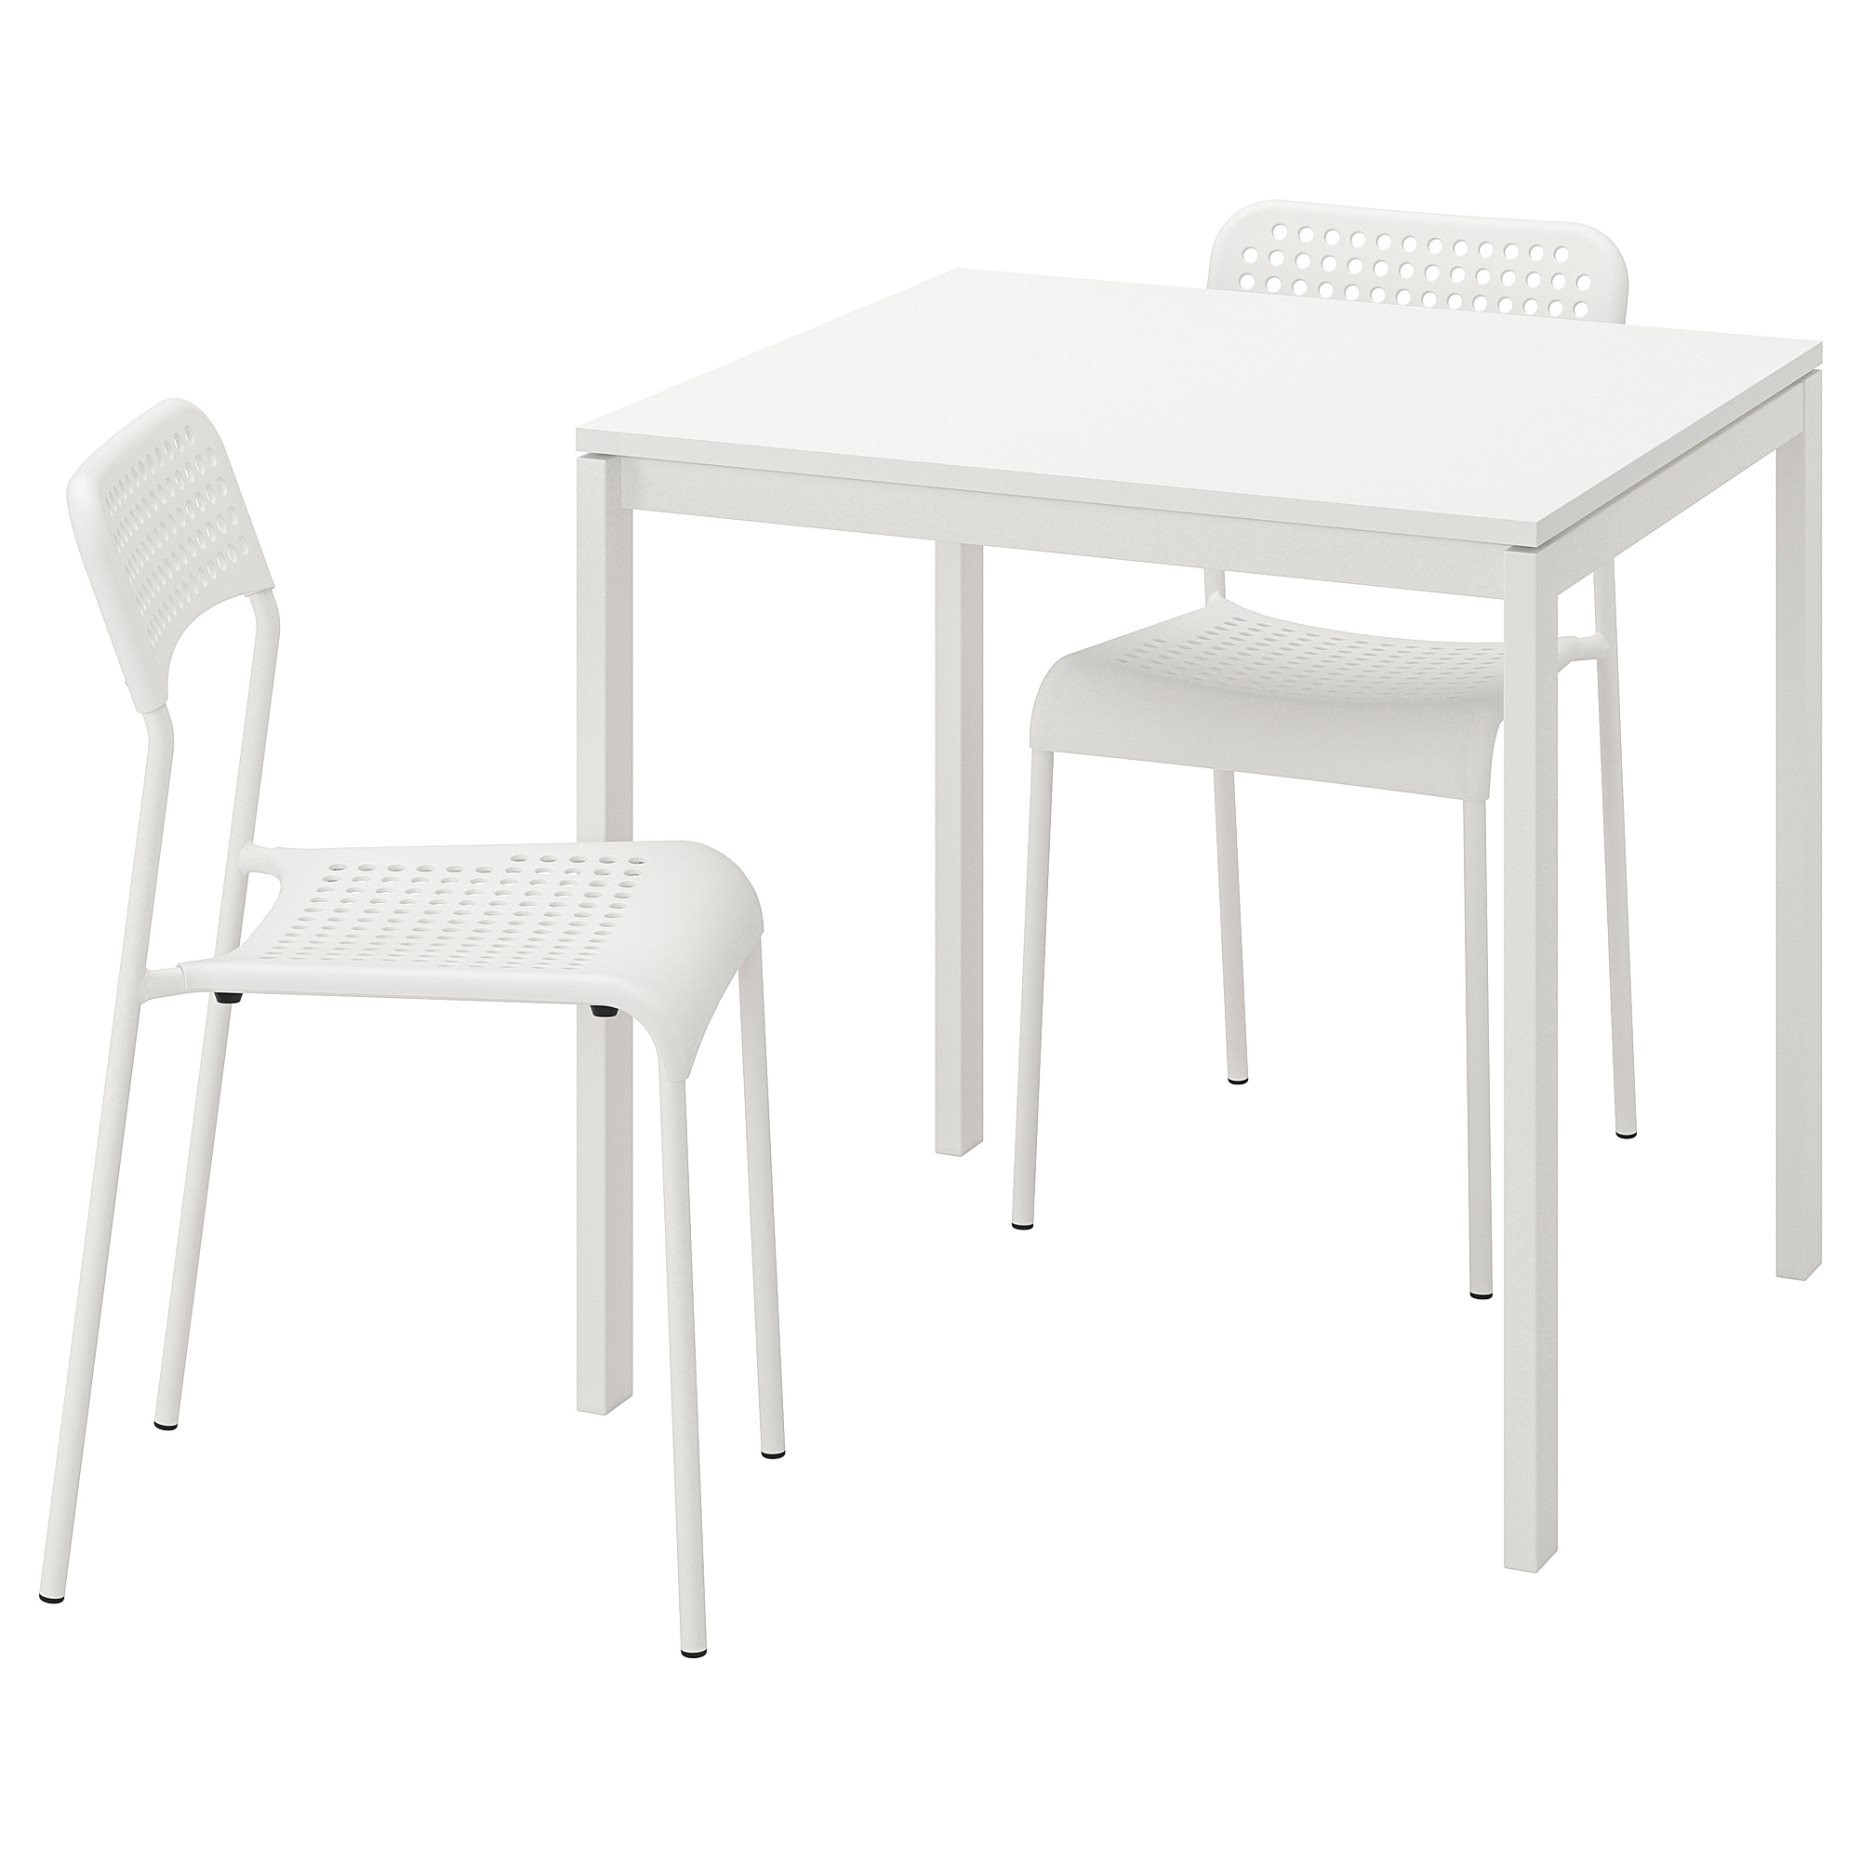 MELLTORP/ADDE, table and 2 chairs, 490.117.66